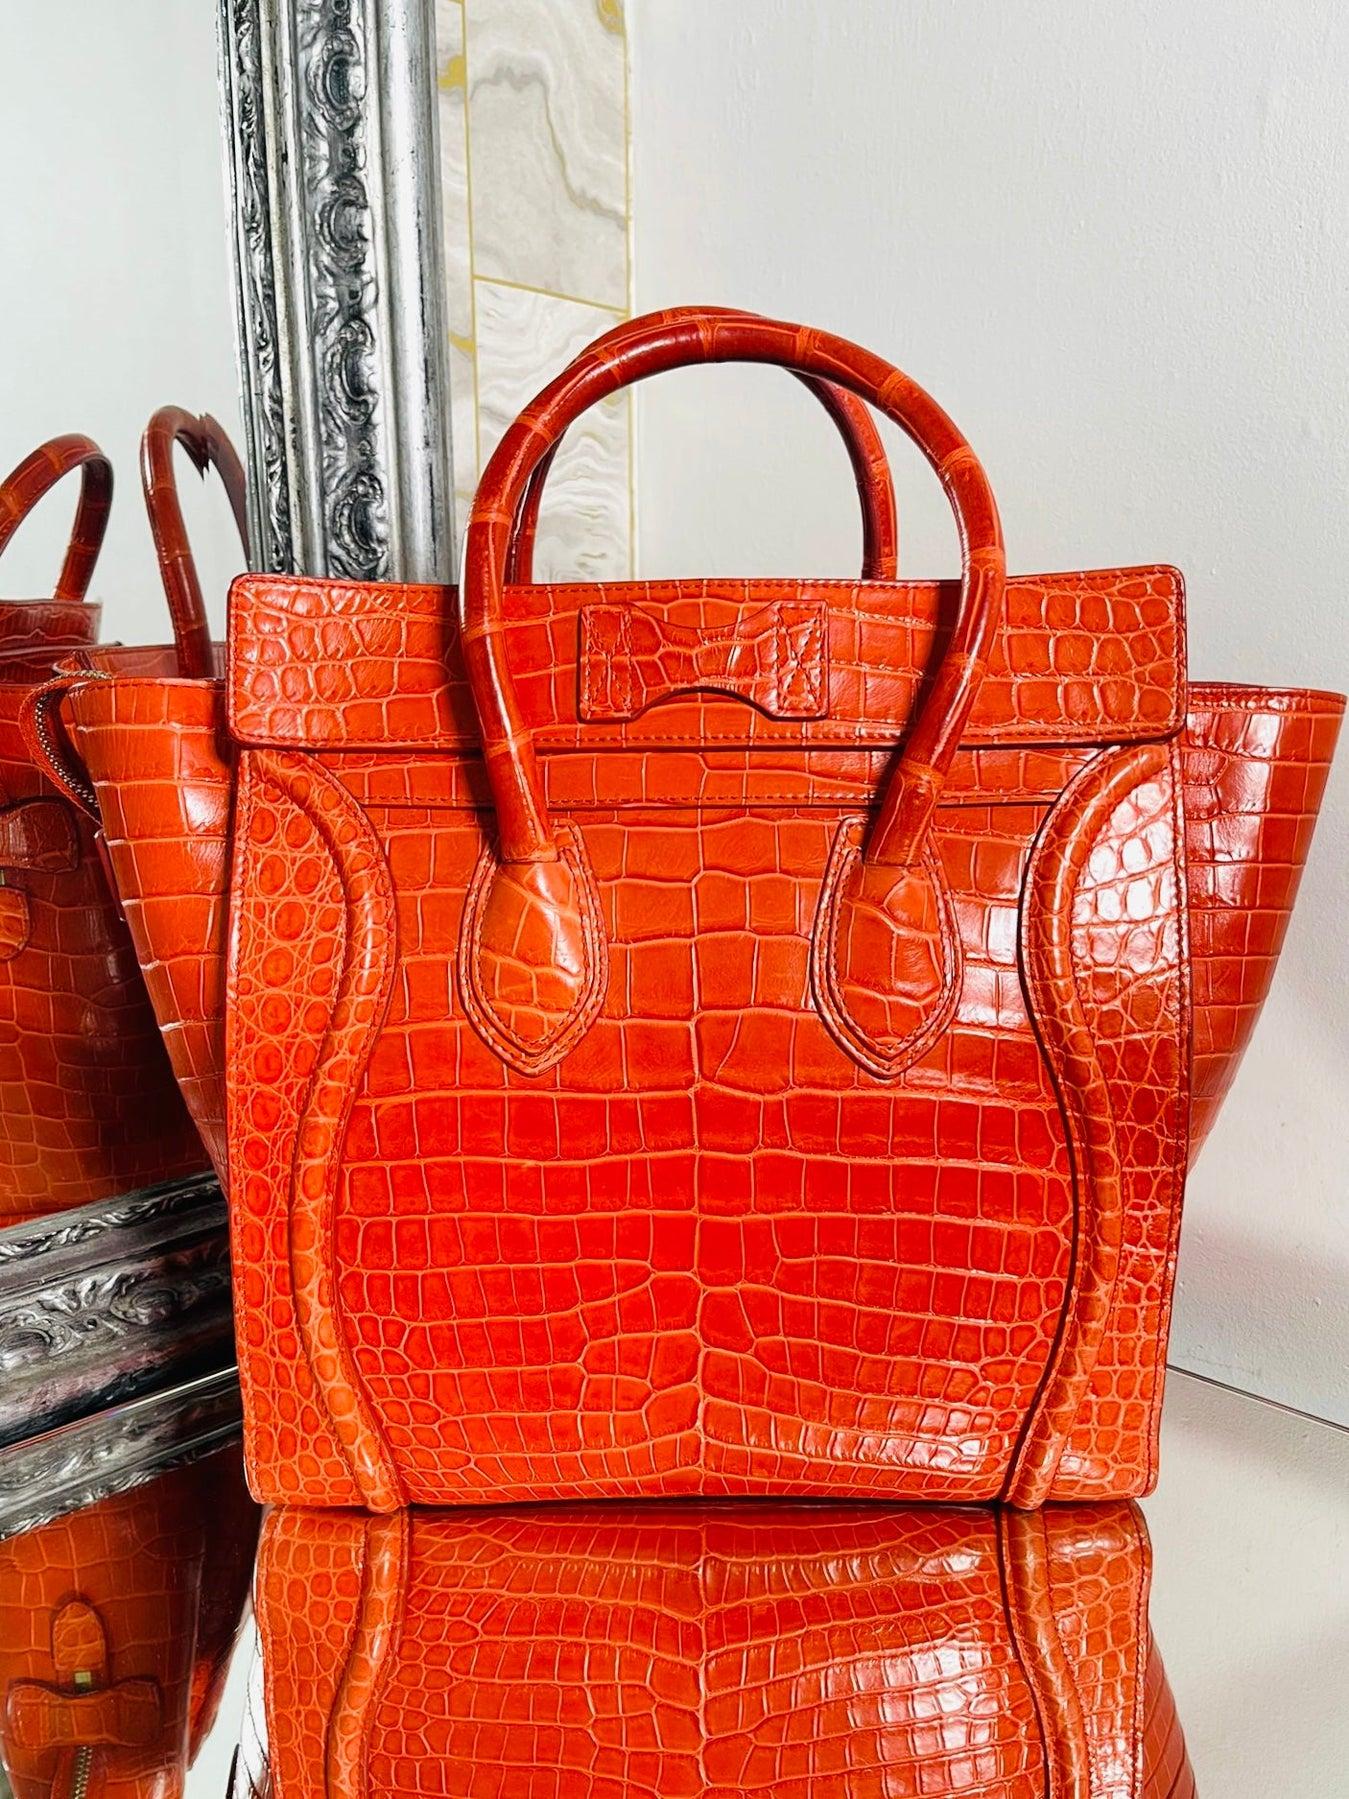 Celine Crocodile Skin Luggage Bag In Excellent Condition For Sale In London, GB